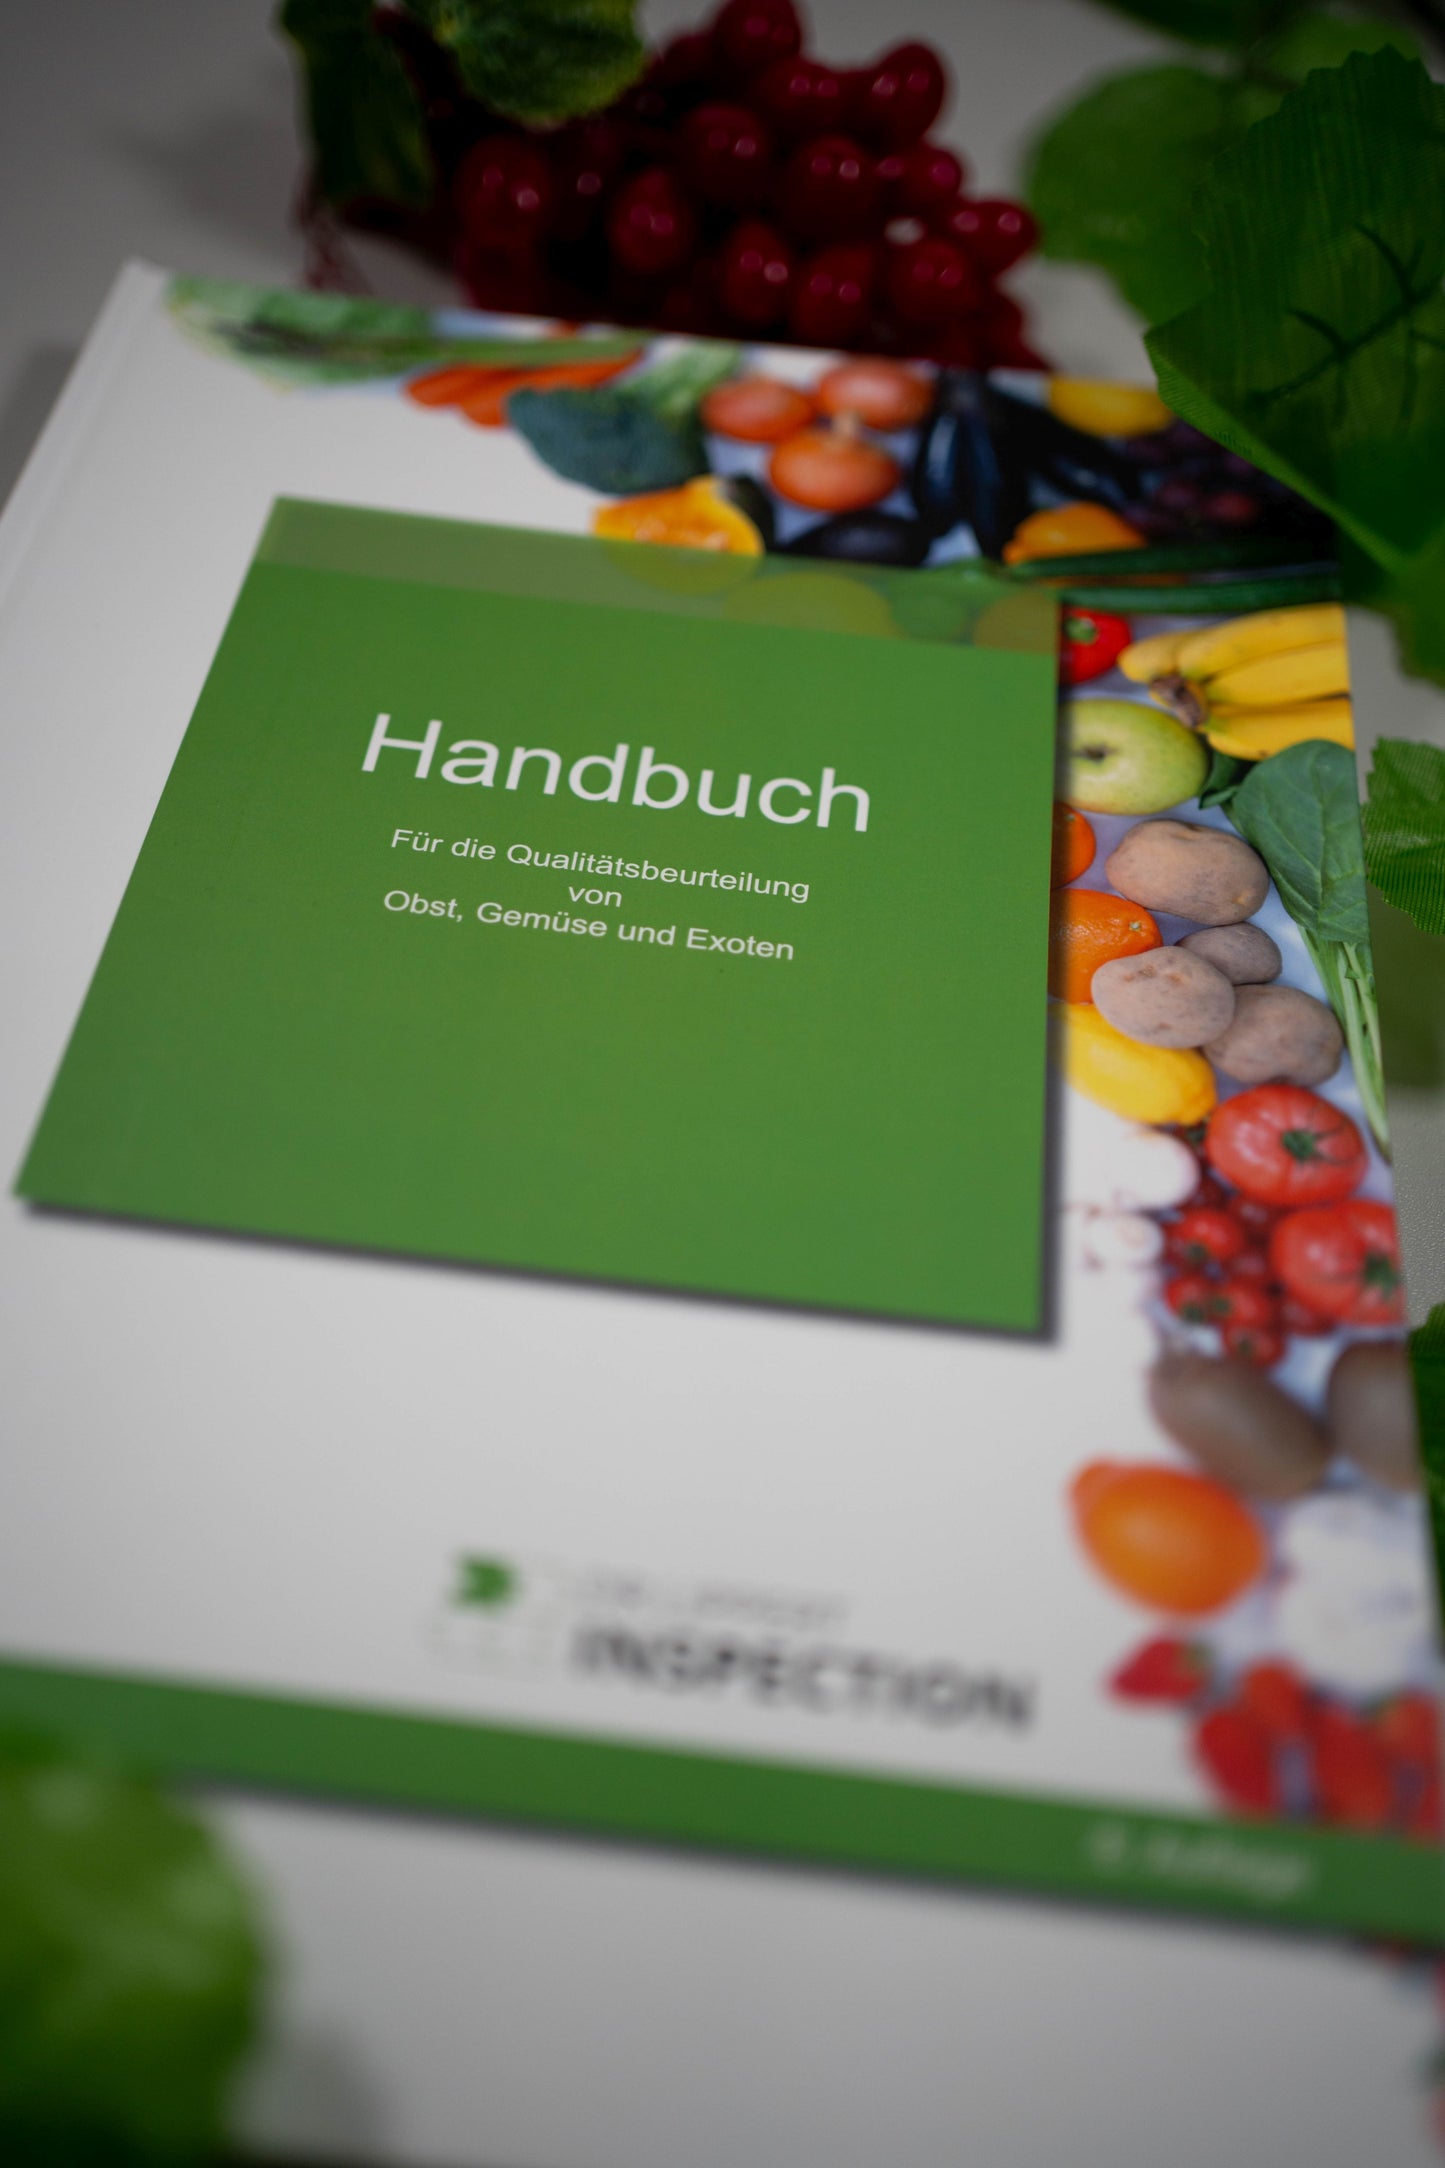 Handbook for assessing the quality of fruit and vegetables